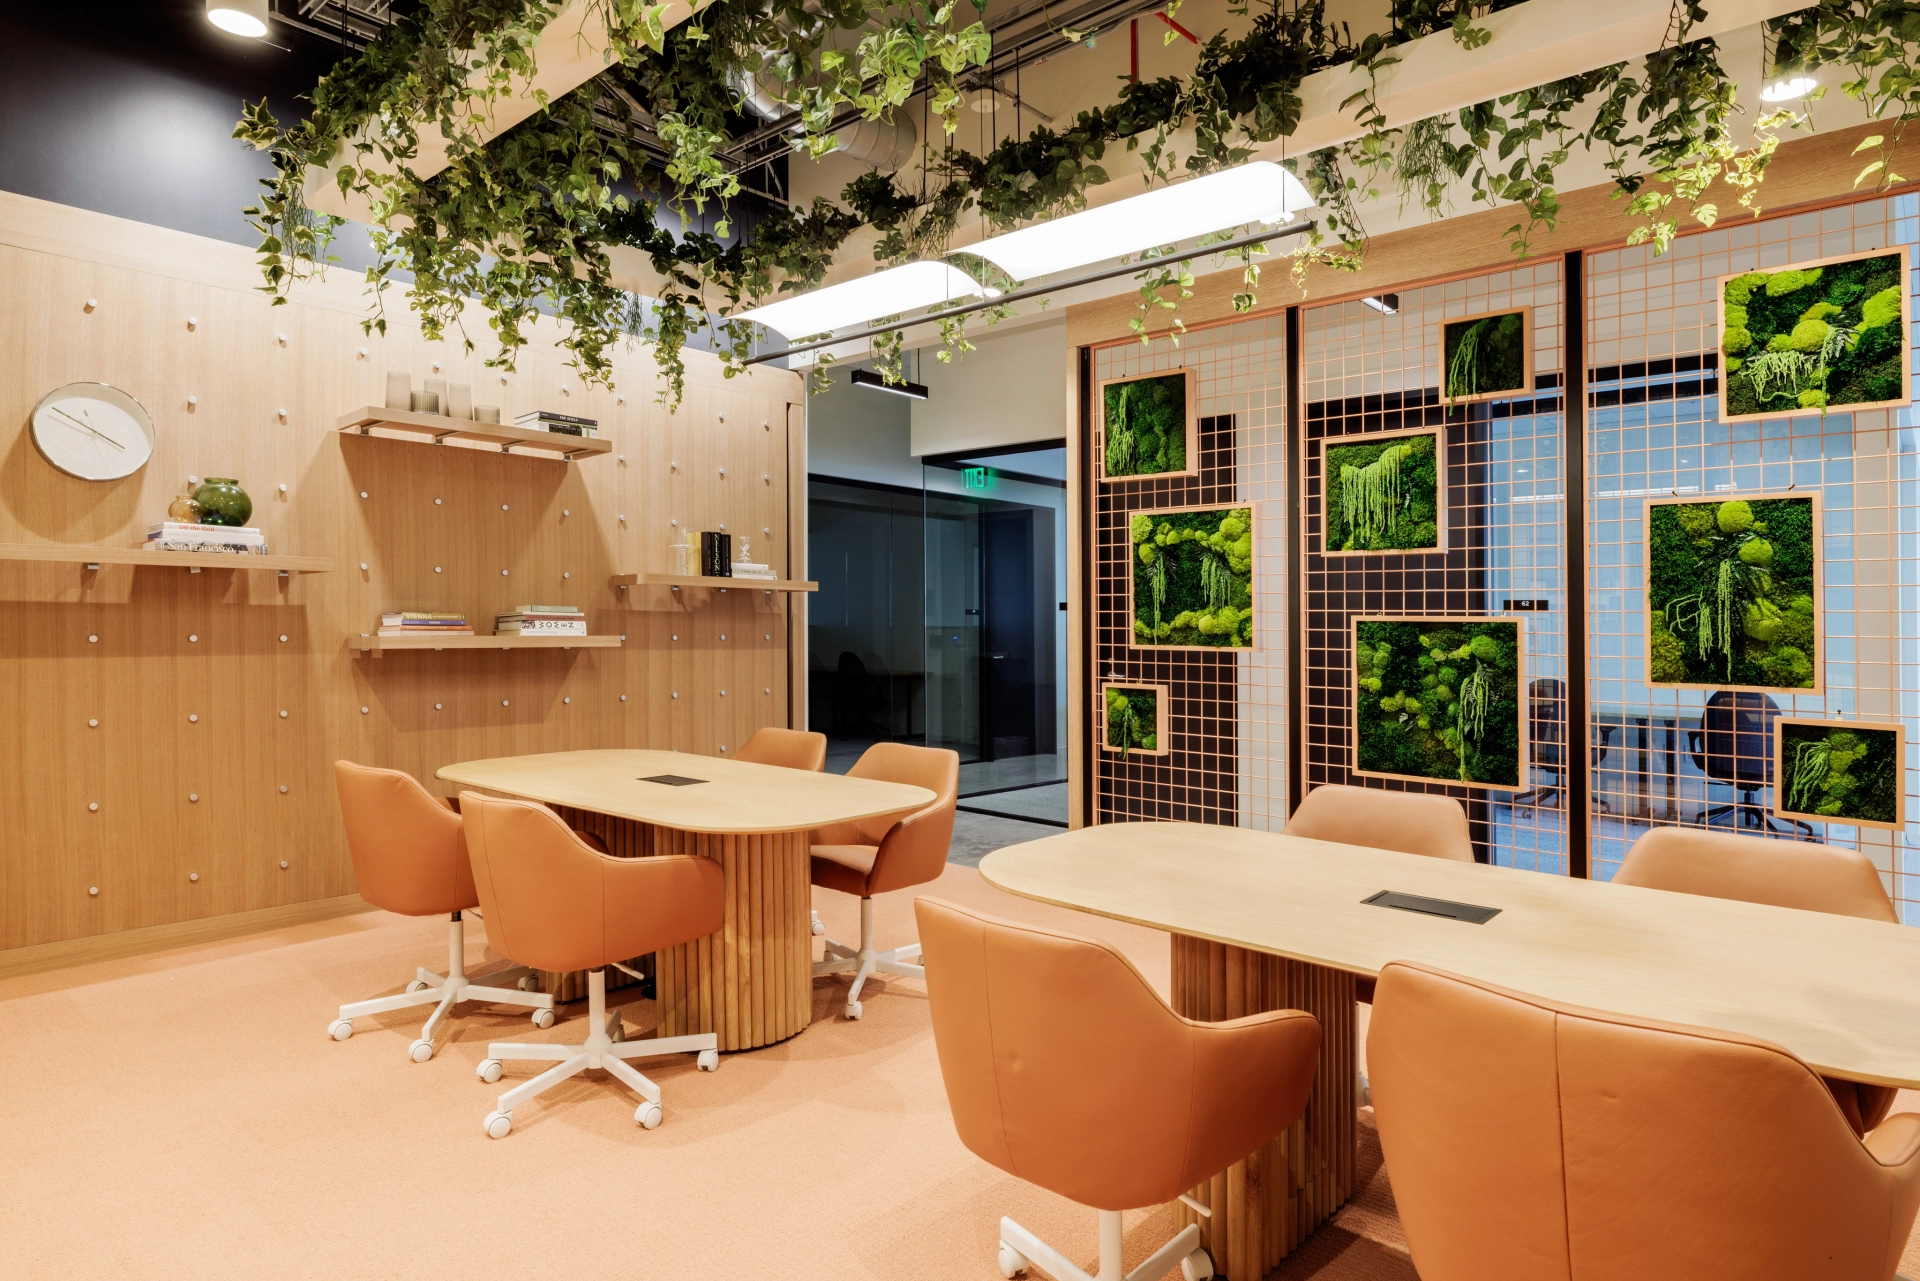 A spacious meeting room in San Francisco equipped with a table and chairs, perfect for collaborative workspace.